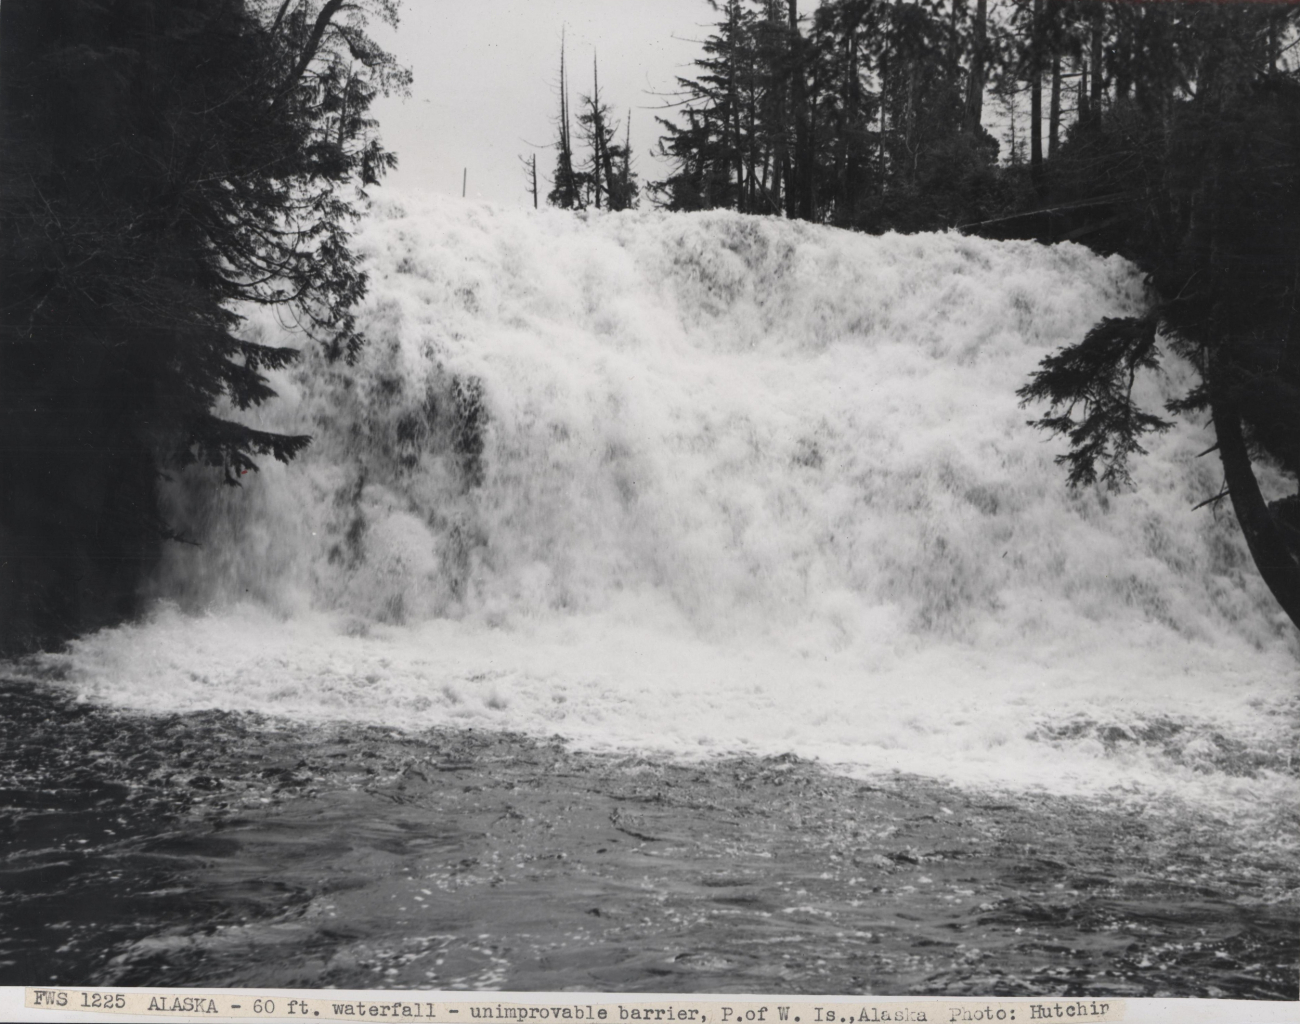 A 60-foot waterfall which was interpeted to be not possible to make passable for fish